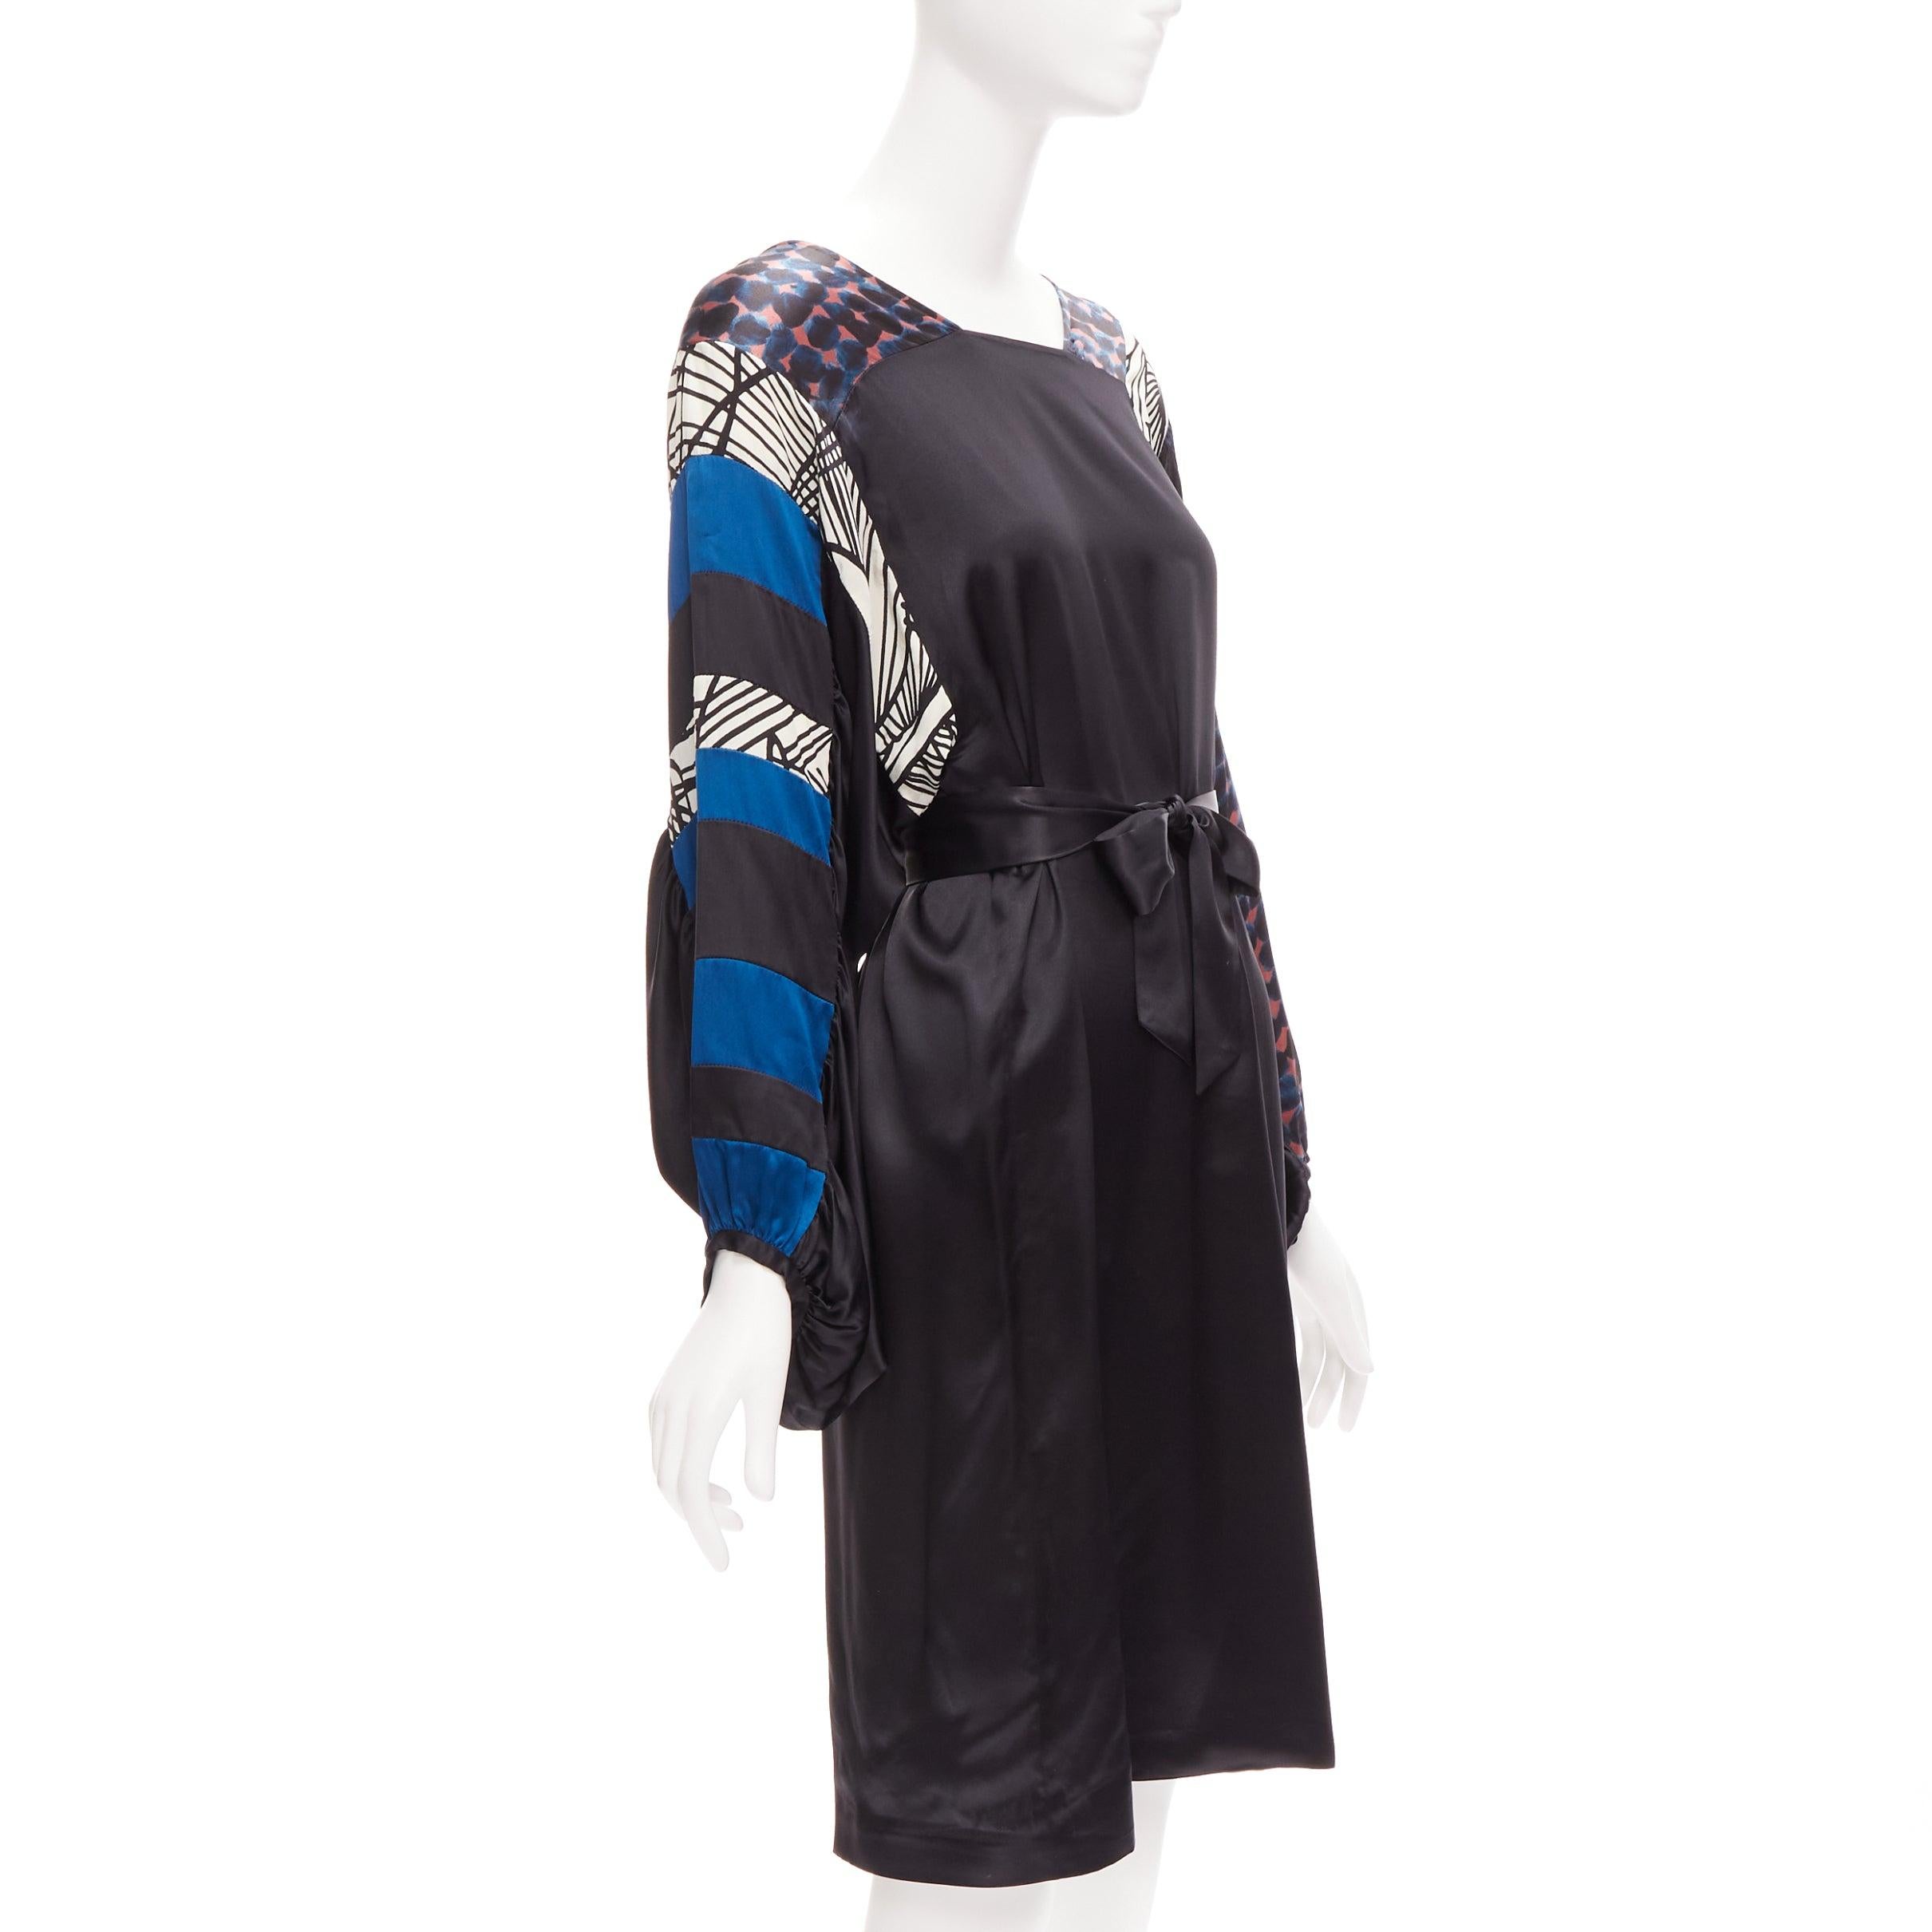 DRIES VAN NOTEN 100% silk black mixed print belted billow knee dress FR36 S
Reference: CELG/A00278
Brand: Dries Van Noten
Material: Silk
Color: Black, Multicolour
Pattern: Geometric
Closure: Belt
Made in: Slovakia

CONDITION:
Condition: Excellent,